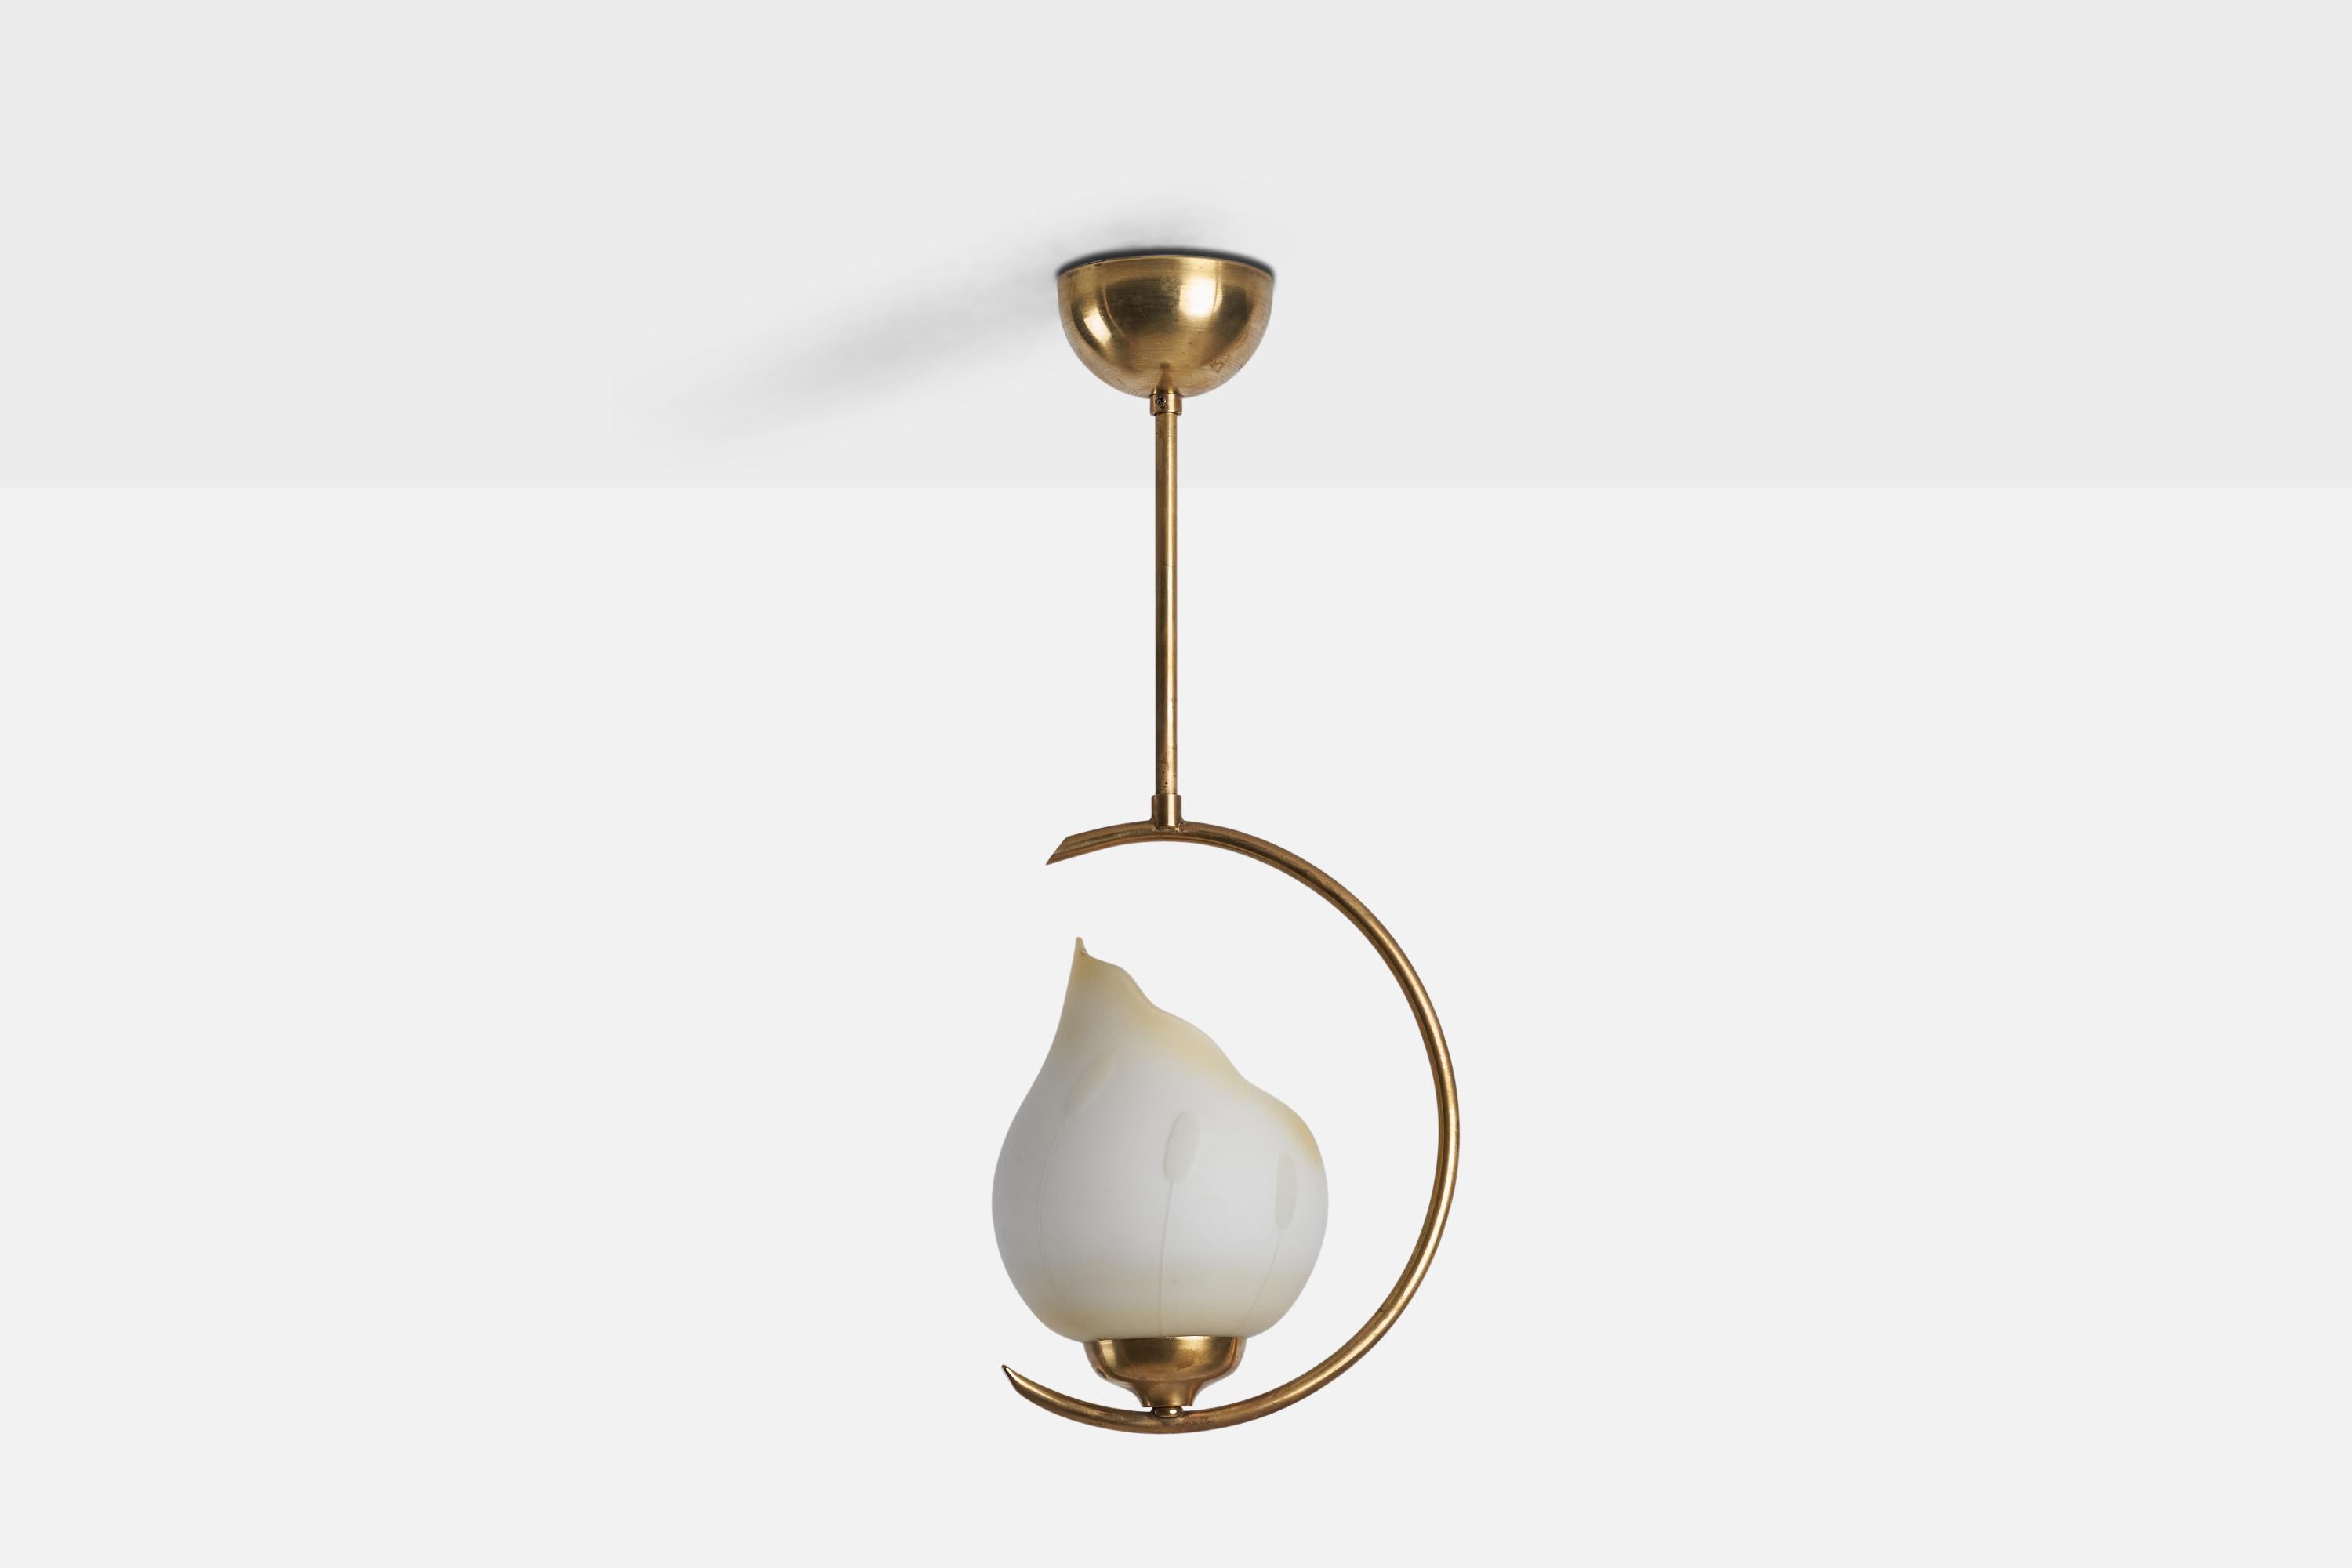 
A brass and glass pendant light designed and produced in Sweden, 1940s.
Dimensions of canopy (inches) : 1.95” H x 3.62” Diameter
Socket takes standard E-26 bulb. There is no maximum wattage stated on the fixture. All lighting will be converted for